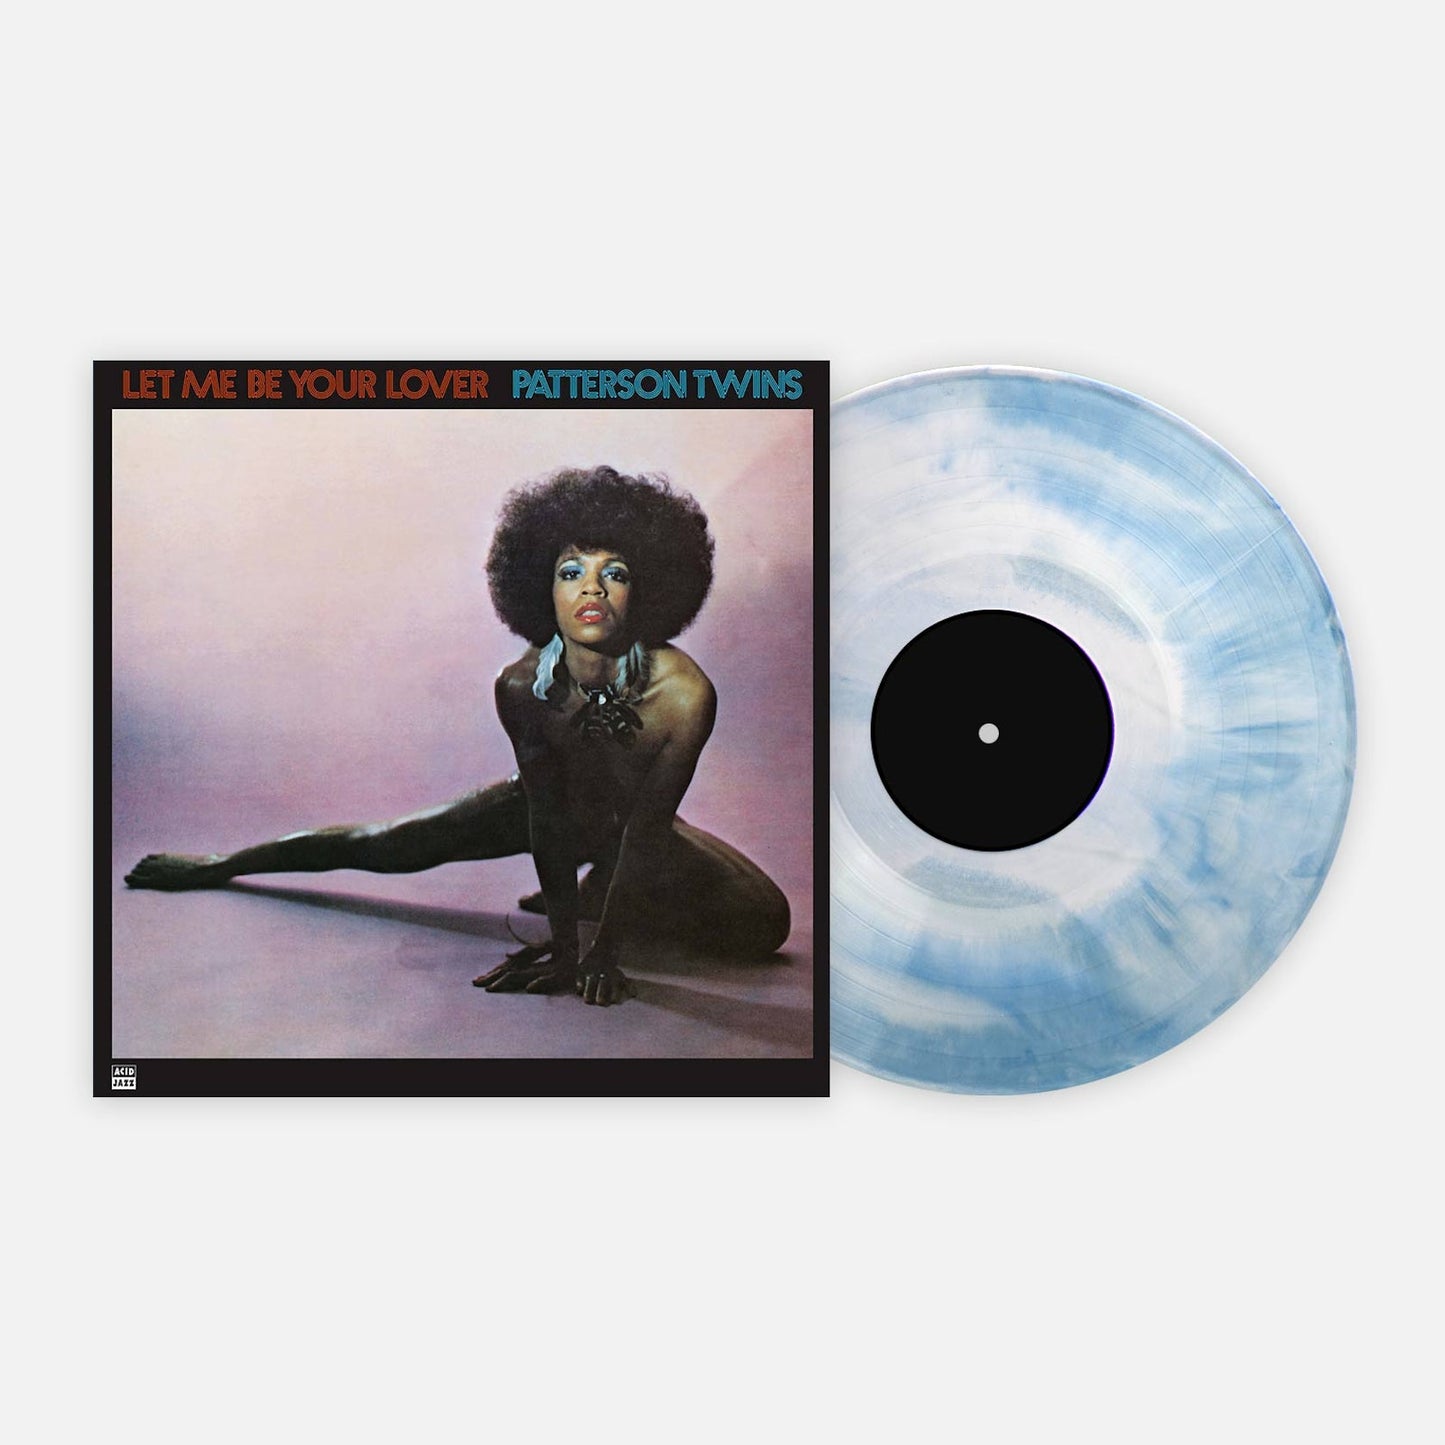 Patterson Twins - Let Me Be Your Lover (Blue & White Galaxy Vinyl Me Please Exclusive Limited to 500 Copies)